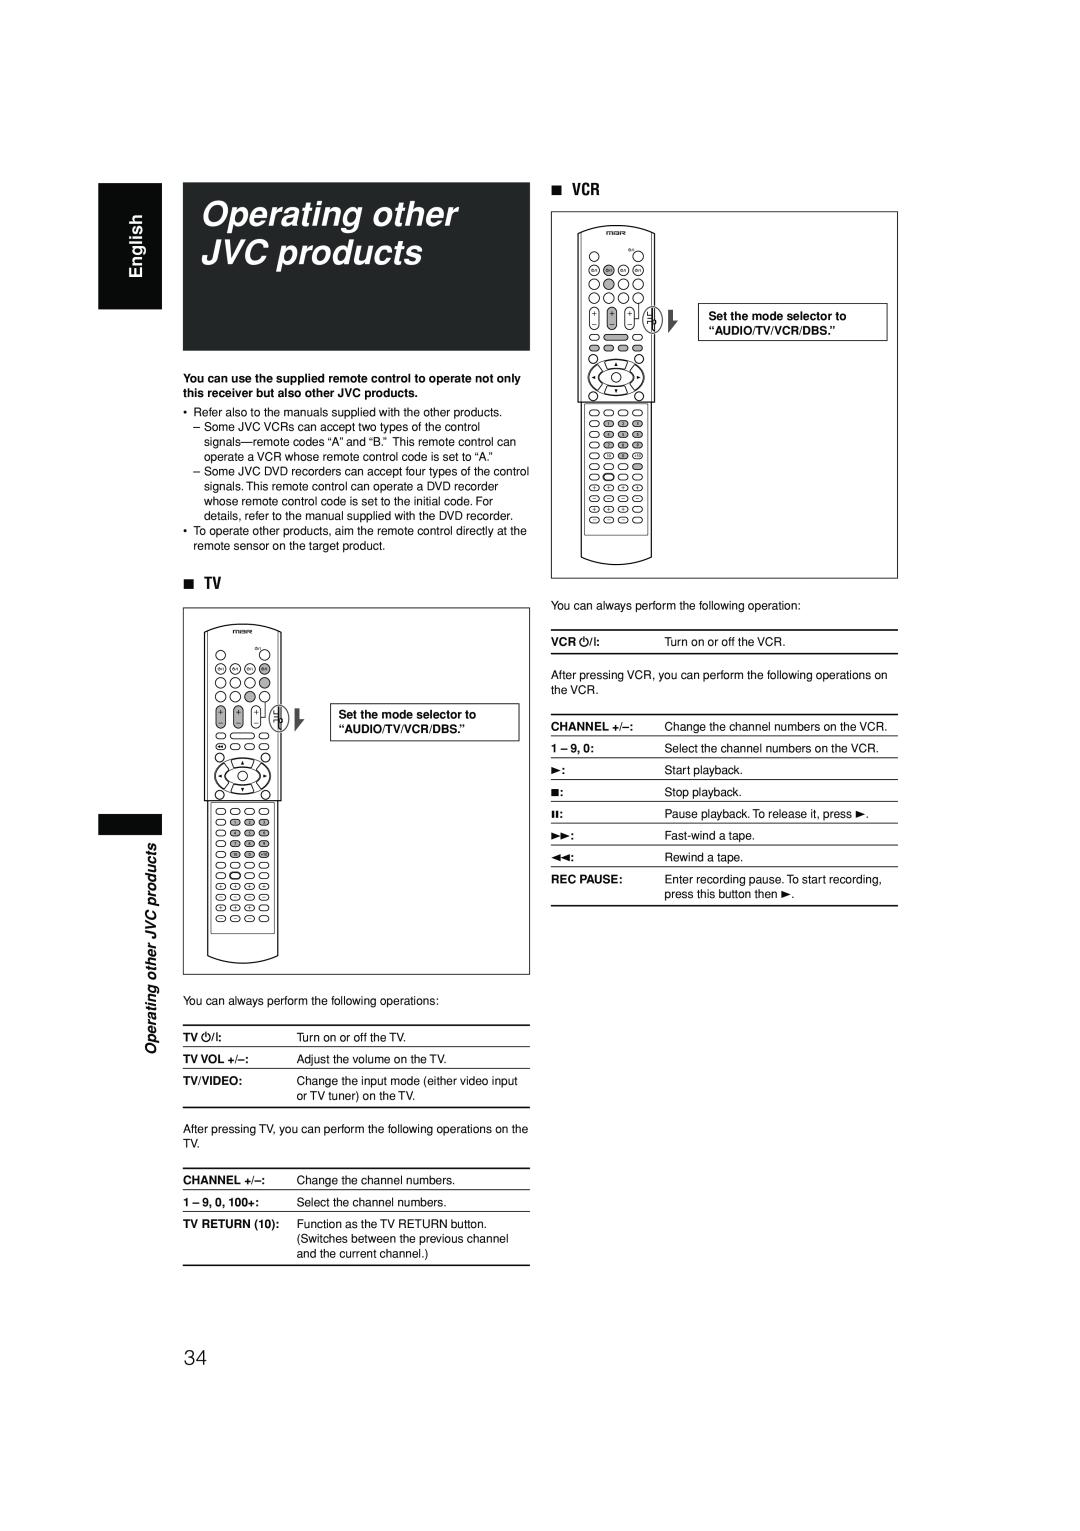 JVC RX-F10S manual Operating other JVC products, English, 7 TV, 7VCR 